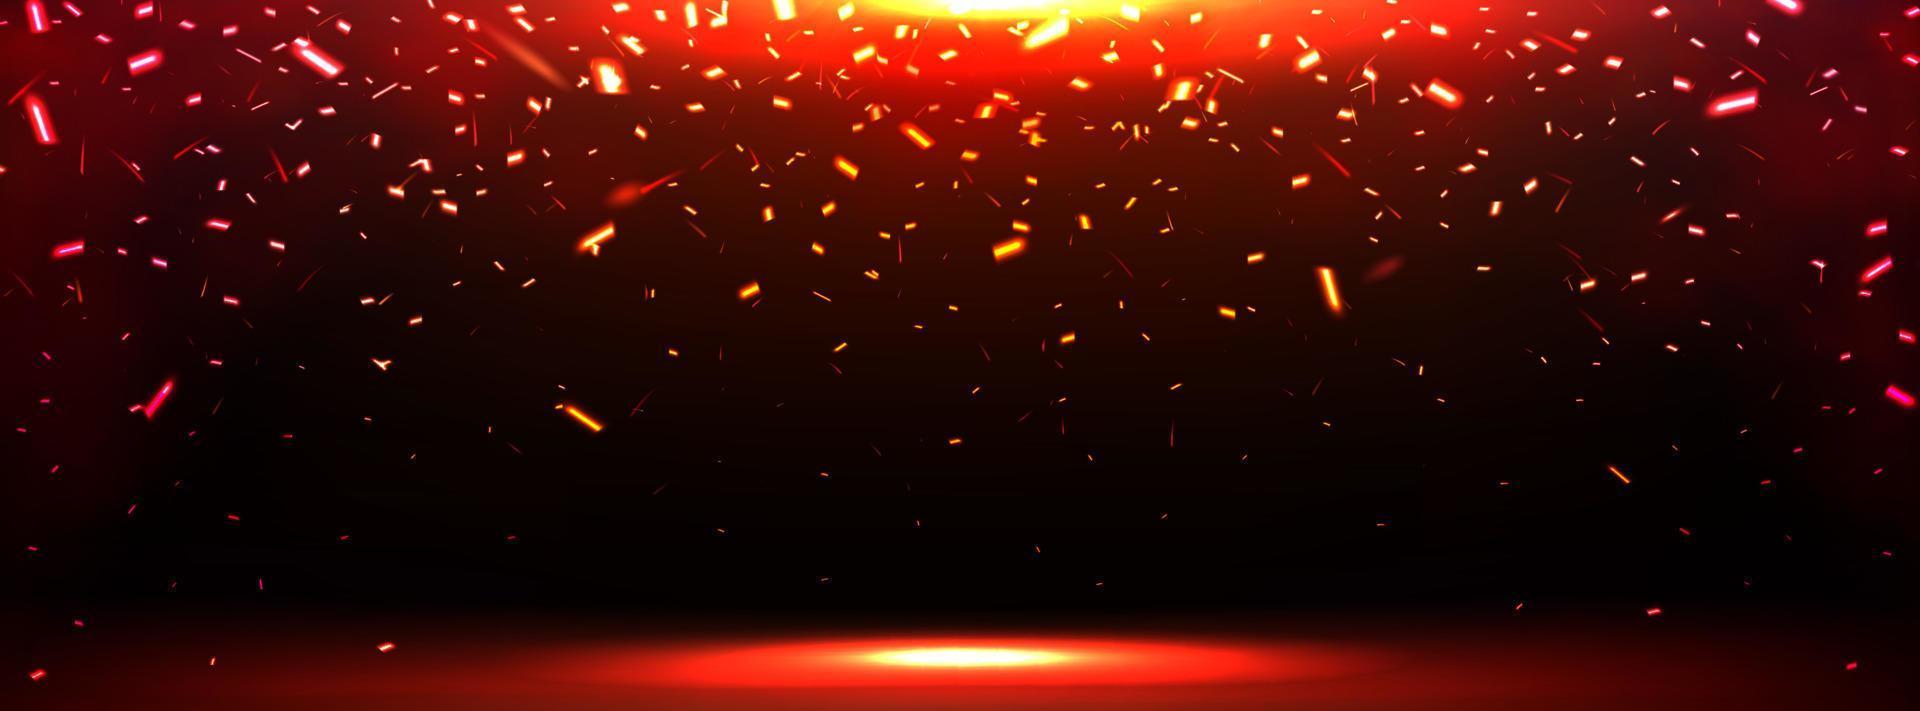 Burst effect with falling fire sparks vector